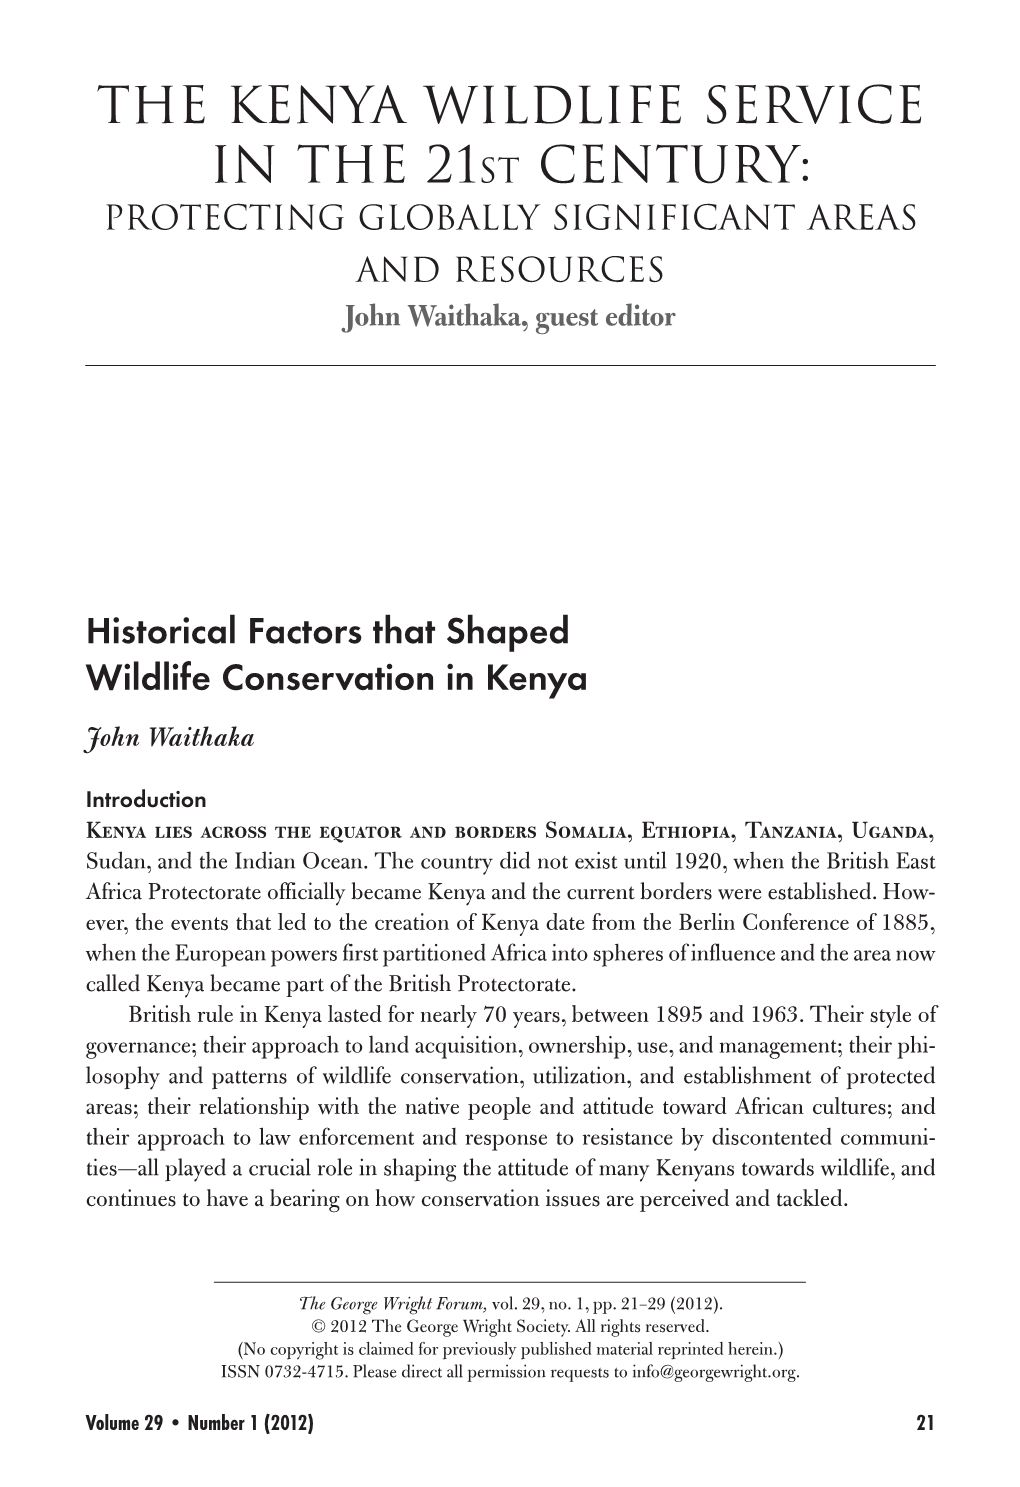 The Kenya Wildlife Service in the 21St Century: Protecting Globally Significant Areas and Resources John Waithaka, Guest Editor